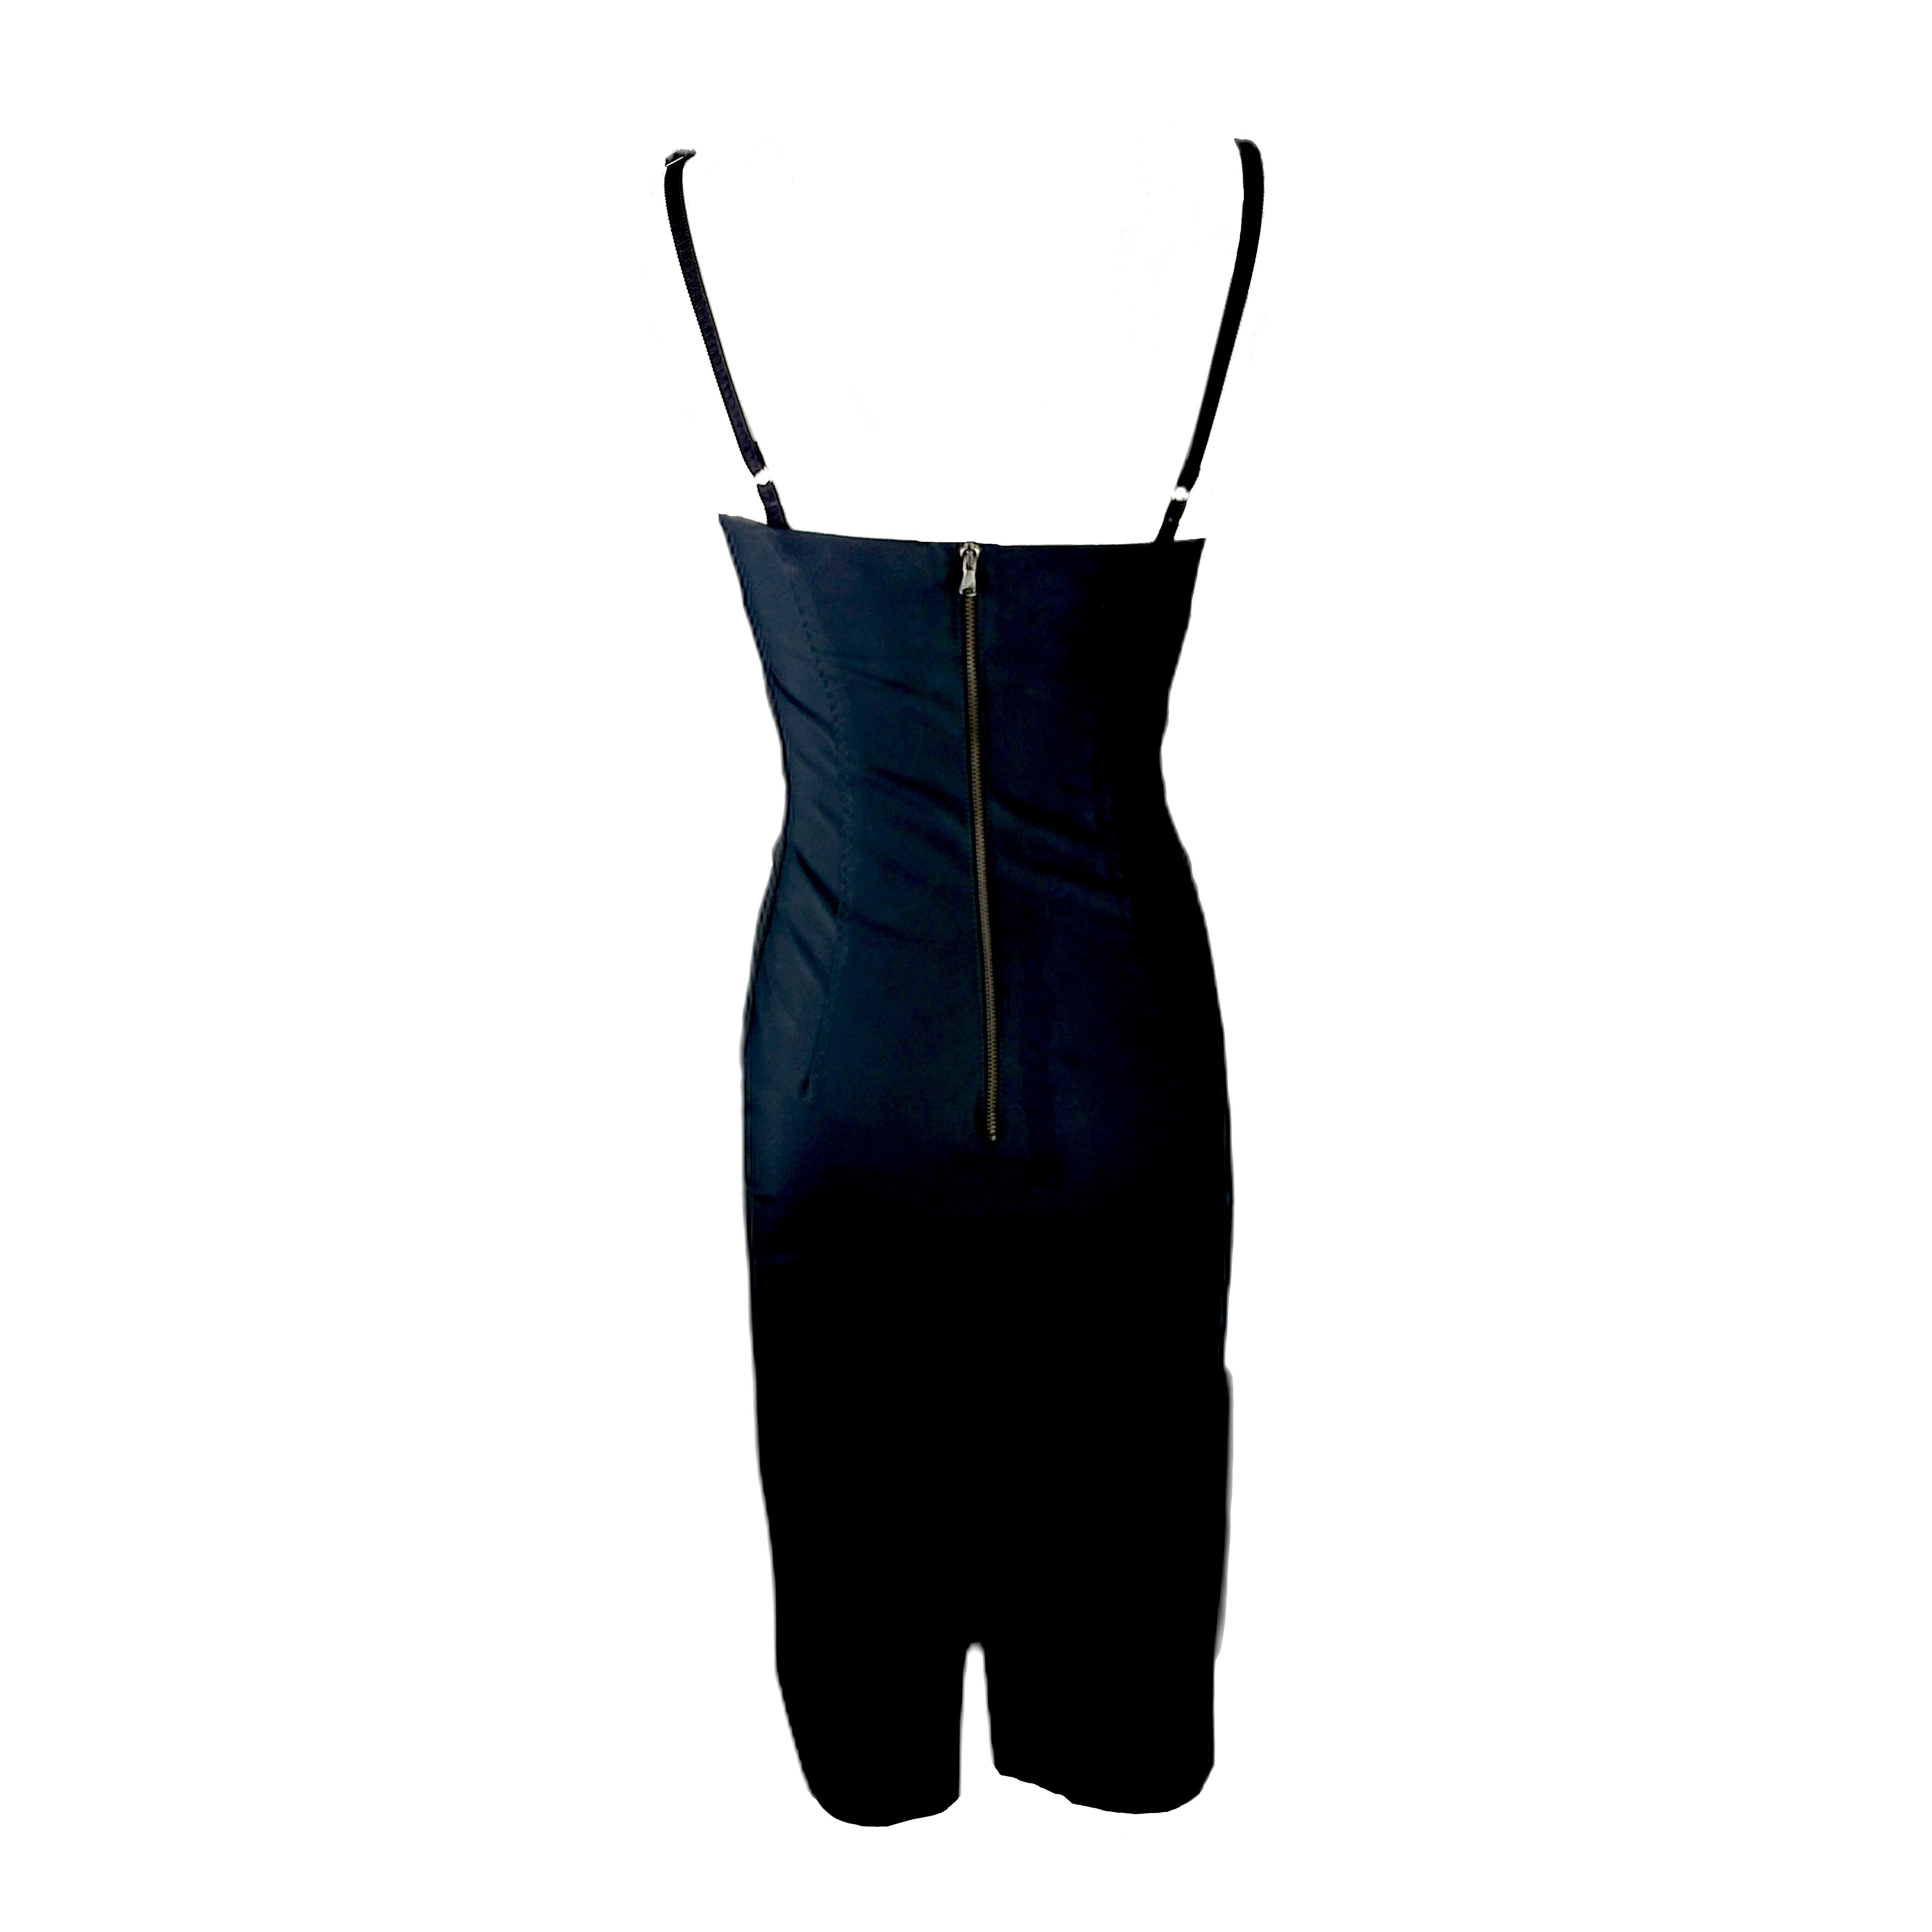 Here is an instant classic by the popular design duo based in Milan, Italy. It is a slip dress with a straight neckline, featuring horizontal pleats on the front side and a rear zip closure. The dress is made of silk stretch fabric and is fully